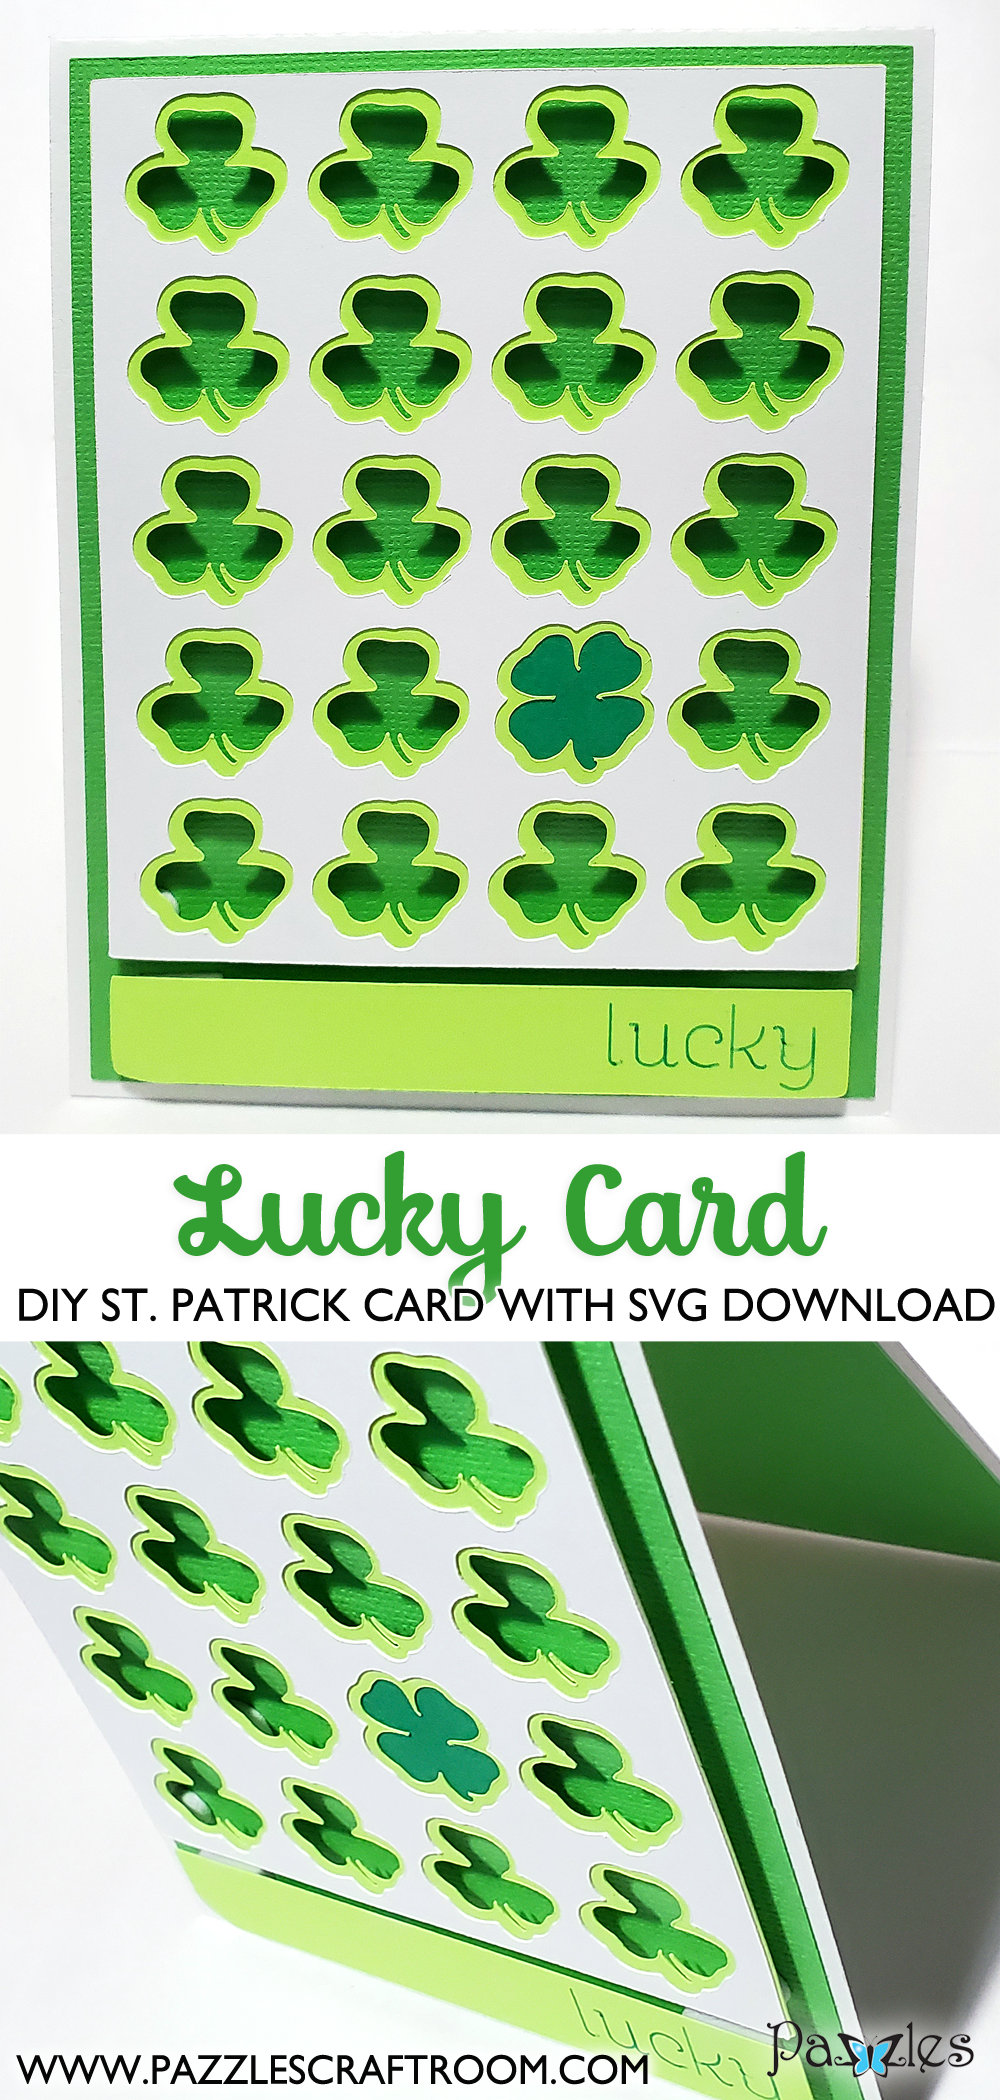 Pazzles DIY Lucky Shamrock Card with instant SVG download.  Instant SVG download compatible with all major electronic cutters including Pazzles Inspiration, Cricut, and Silhouette Cameo. Design by Renee Smart.